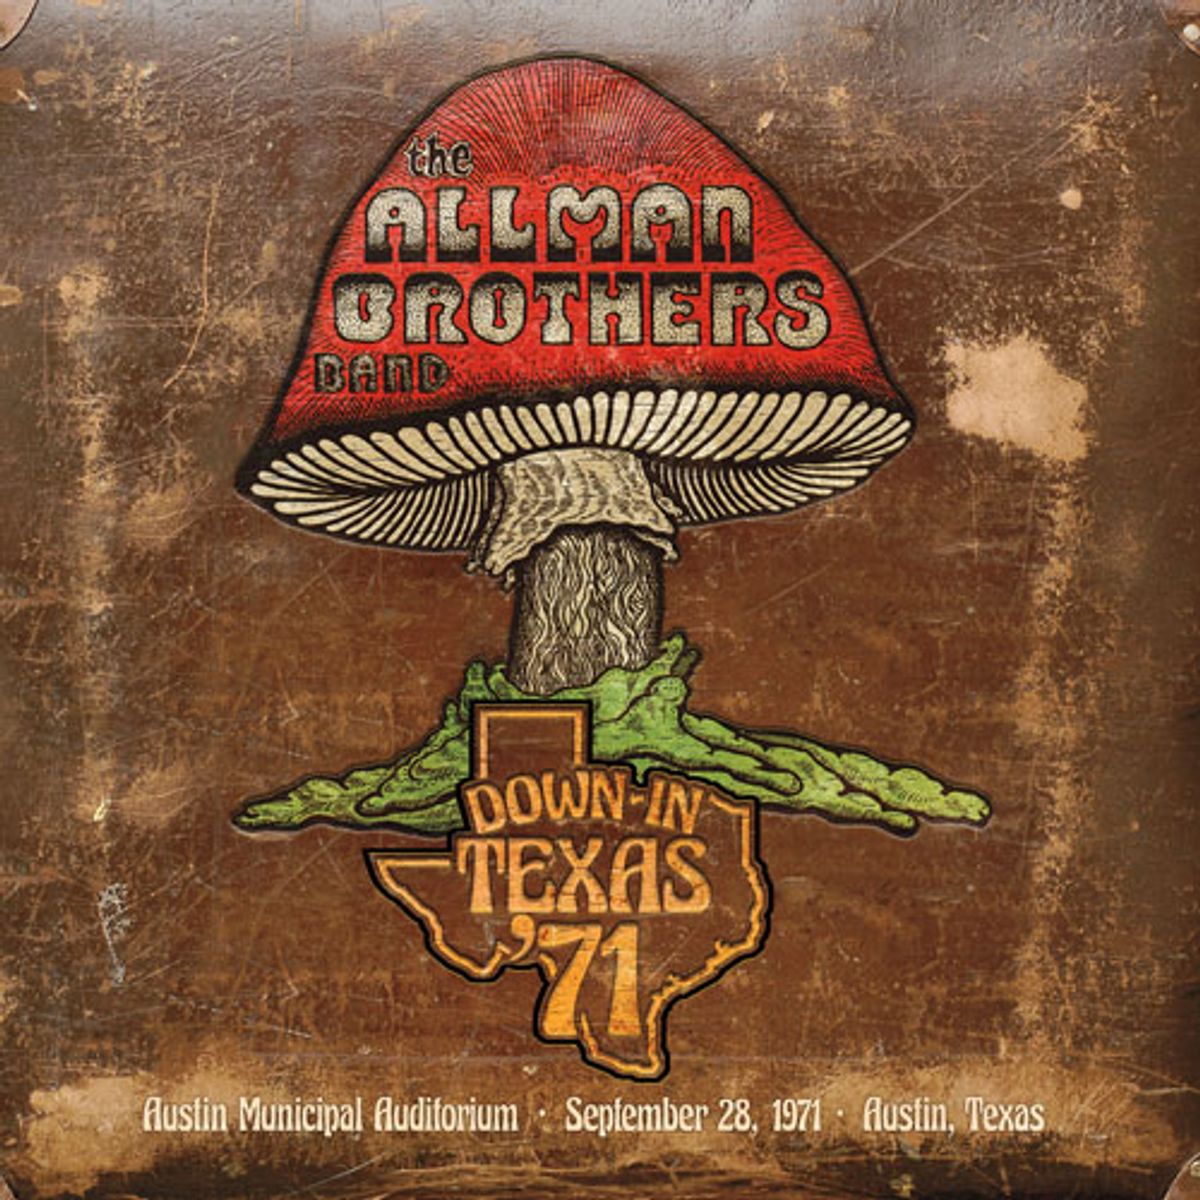 Allman Brothers Band to Release Down in Texas '71